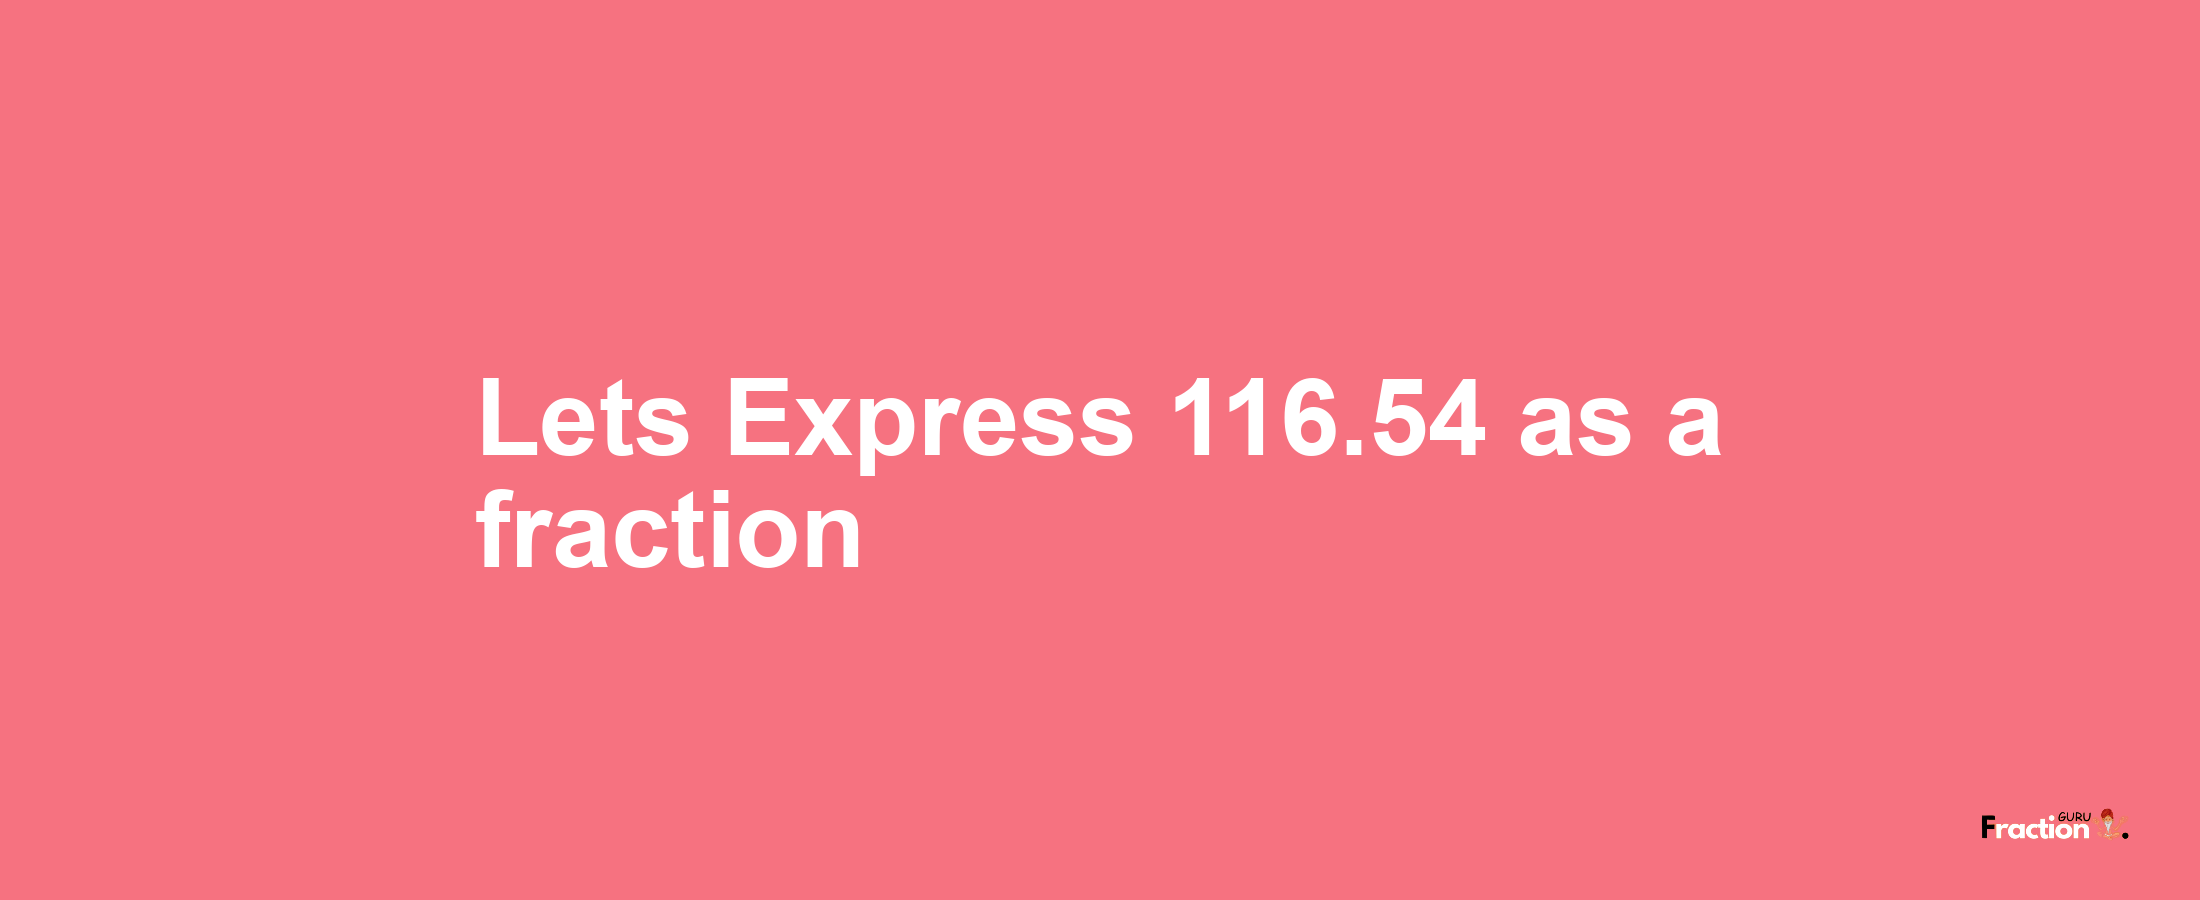 Lets Express 116.54 as afraction